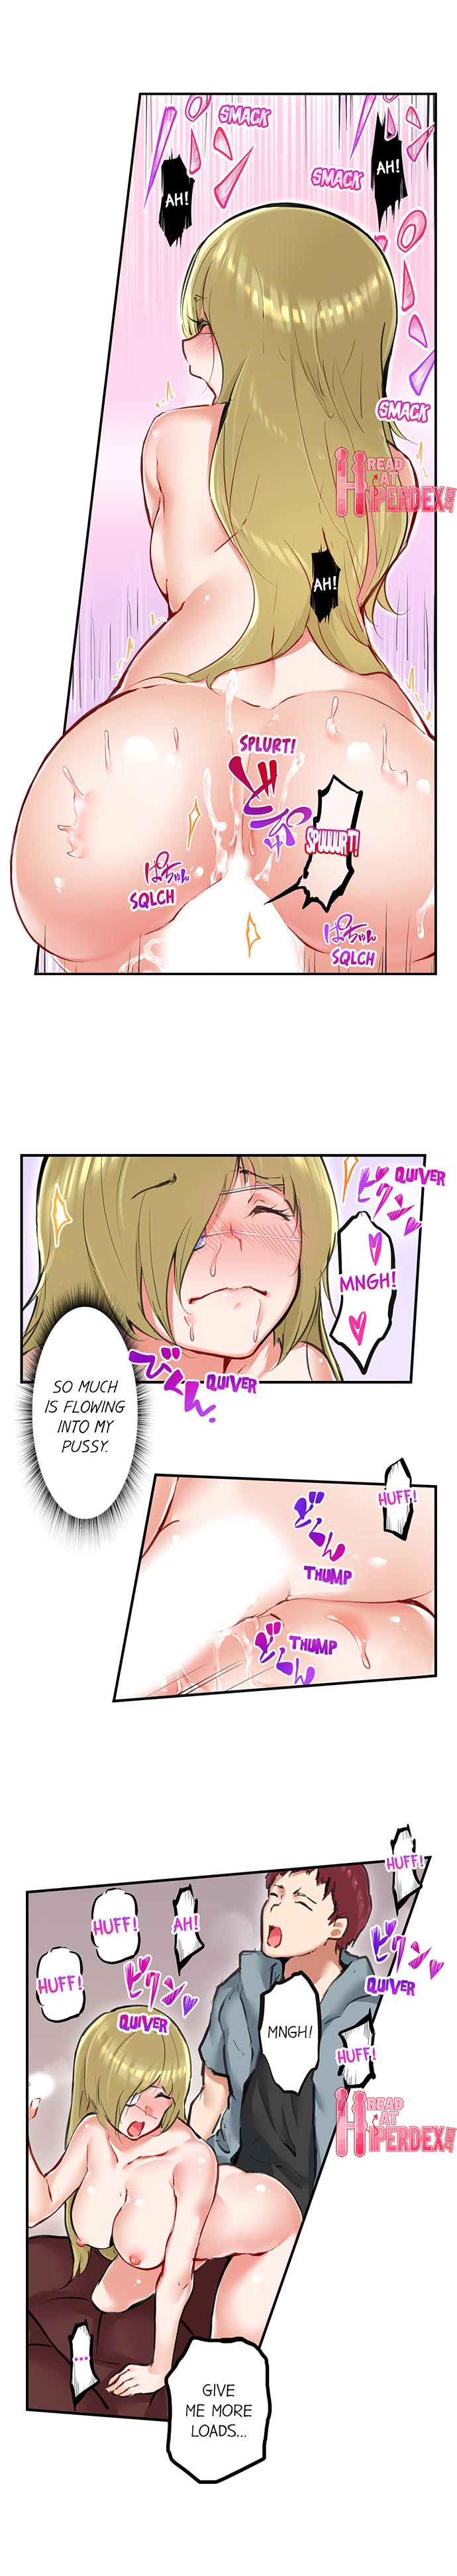 All Night Sex with Biggest Cock - Chapter 25 Page 4